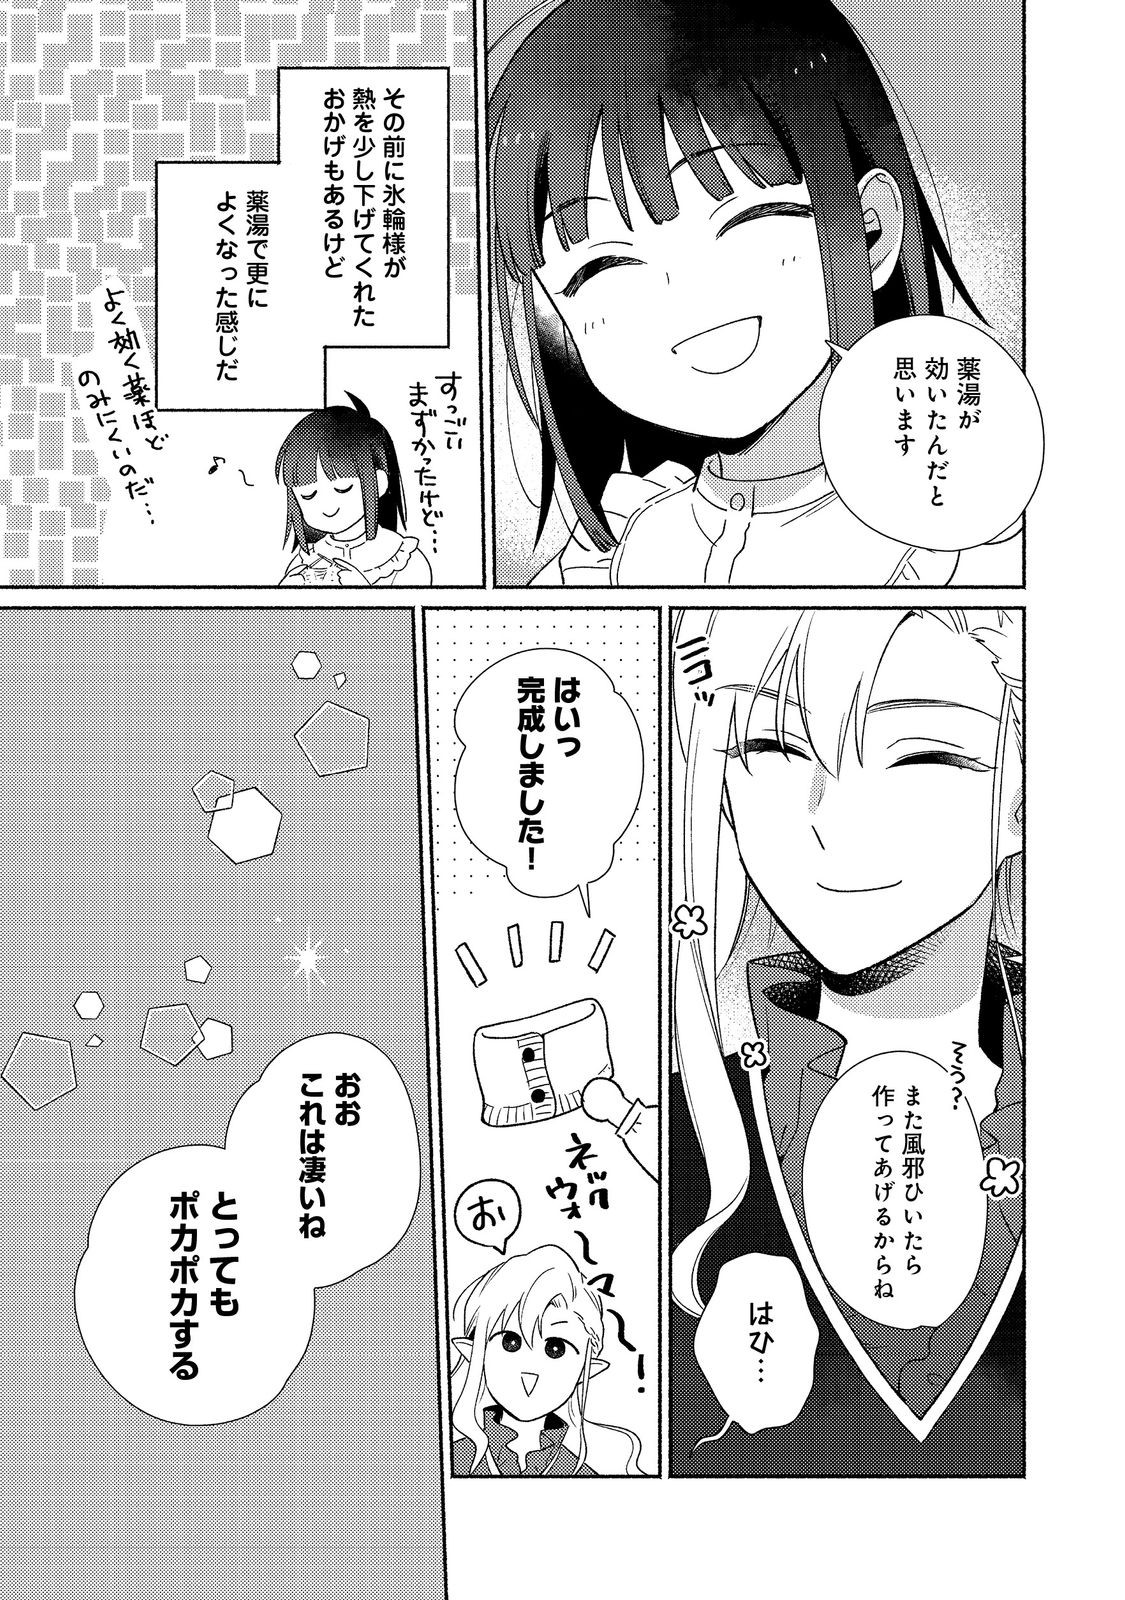 I’m the White Pig Nobleman 第22.2話 - Page 11